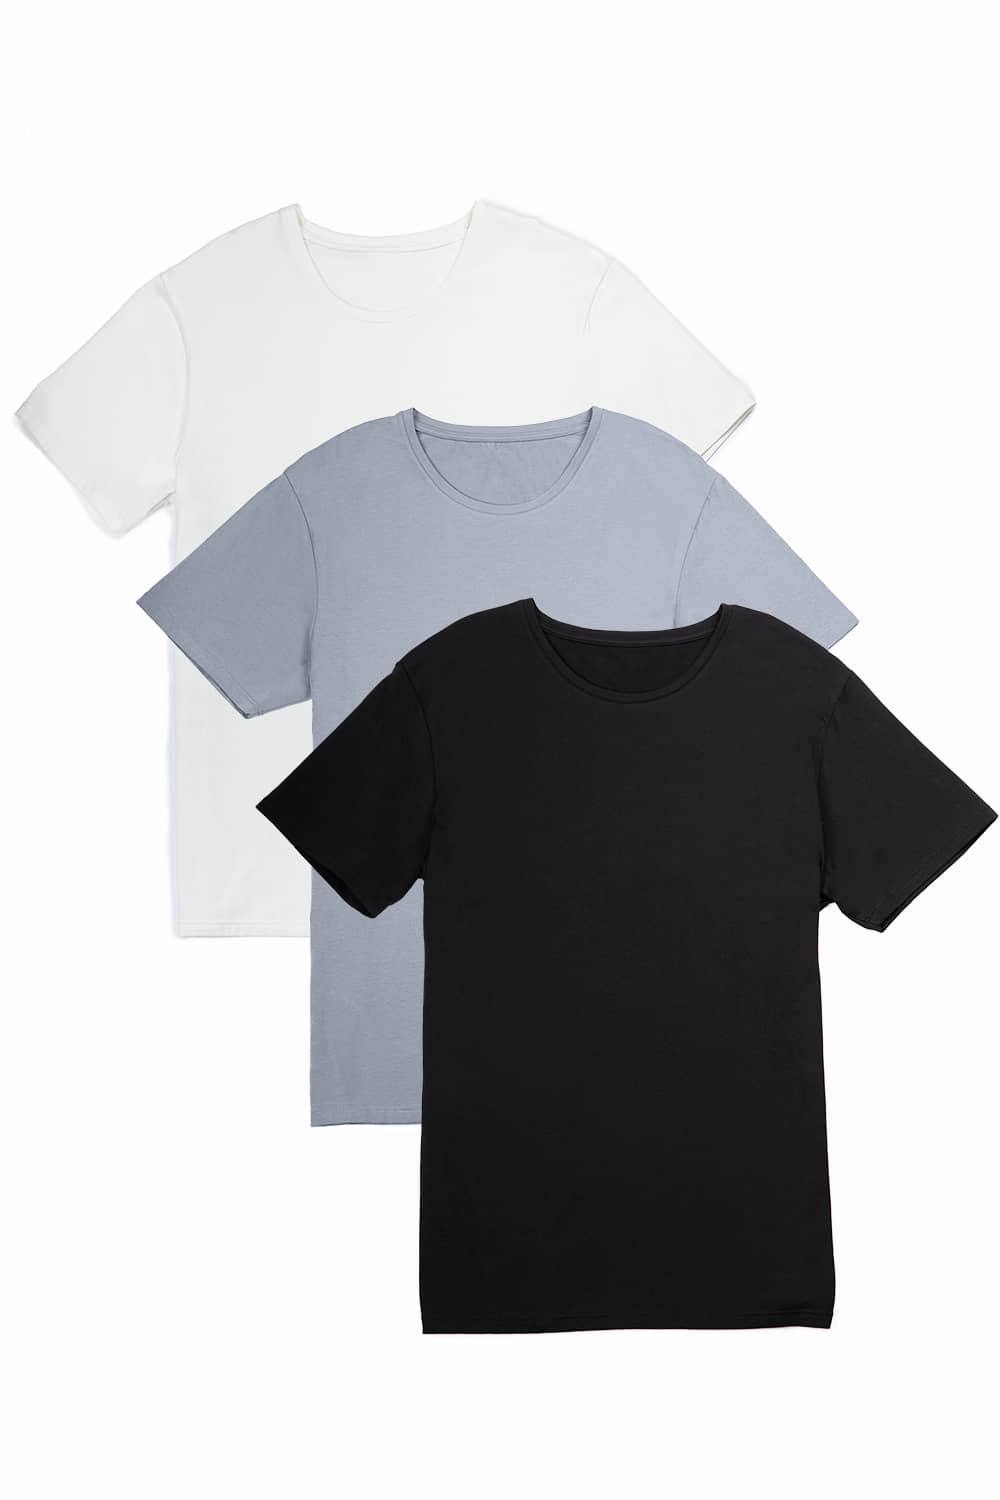 Men's Classic Fit Soft Stretch Crew Neck Undershirt Mens>Casual>Tops Fishers Finery Black Gray White Small 3 Pack